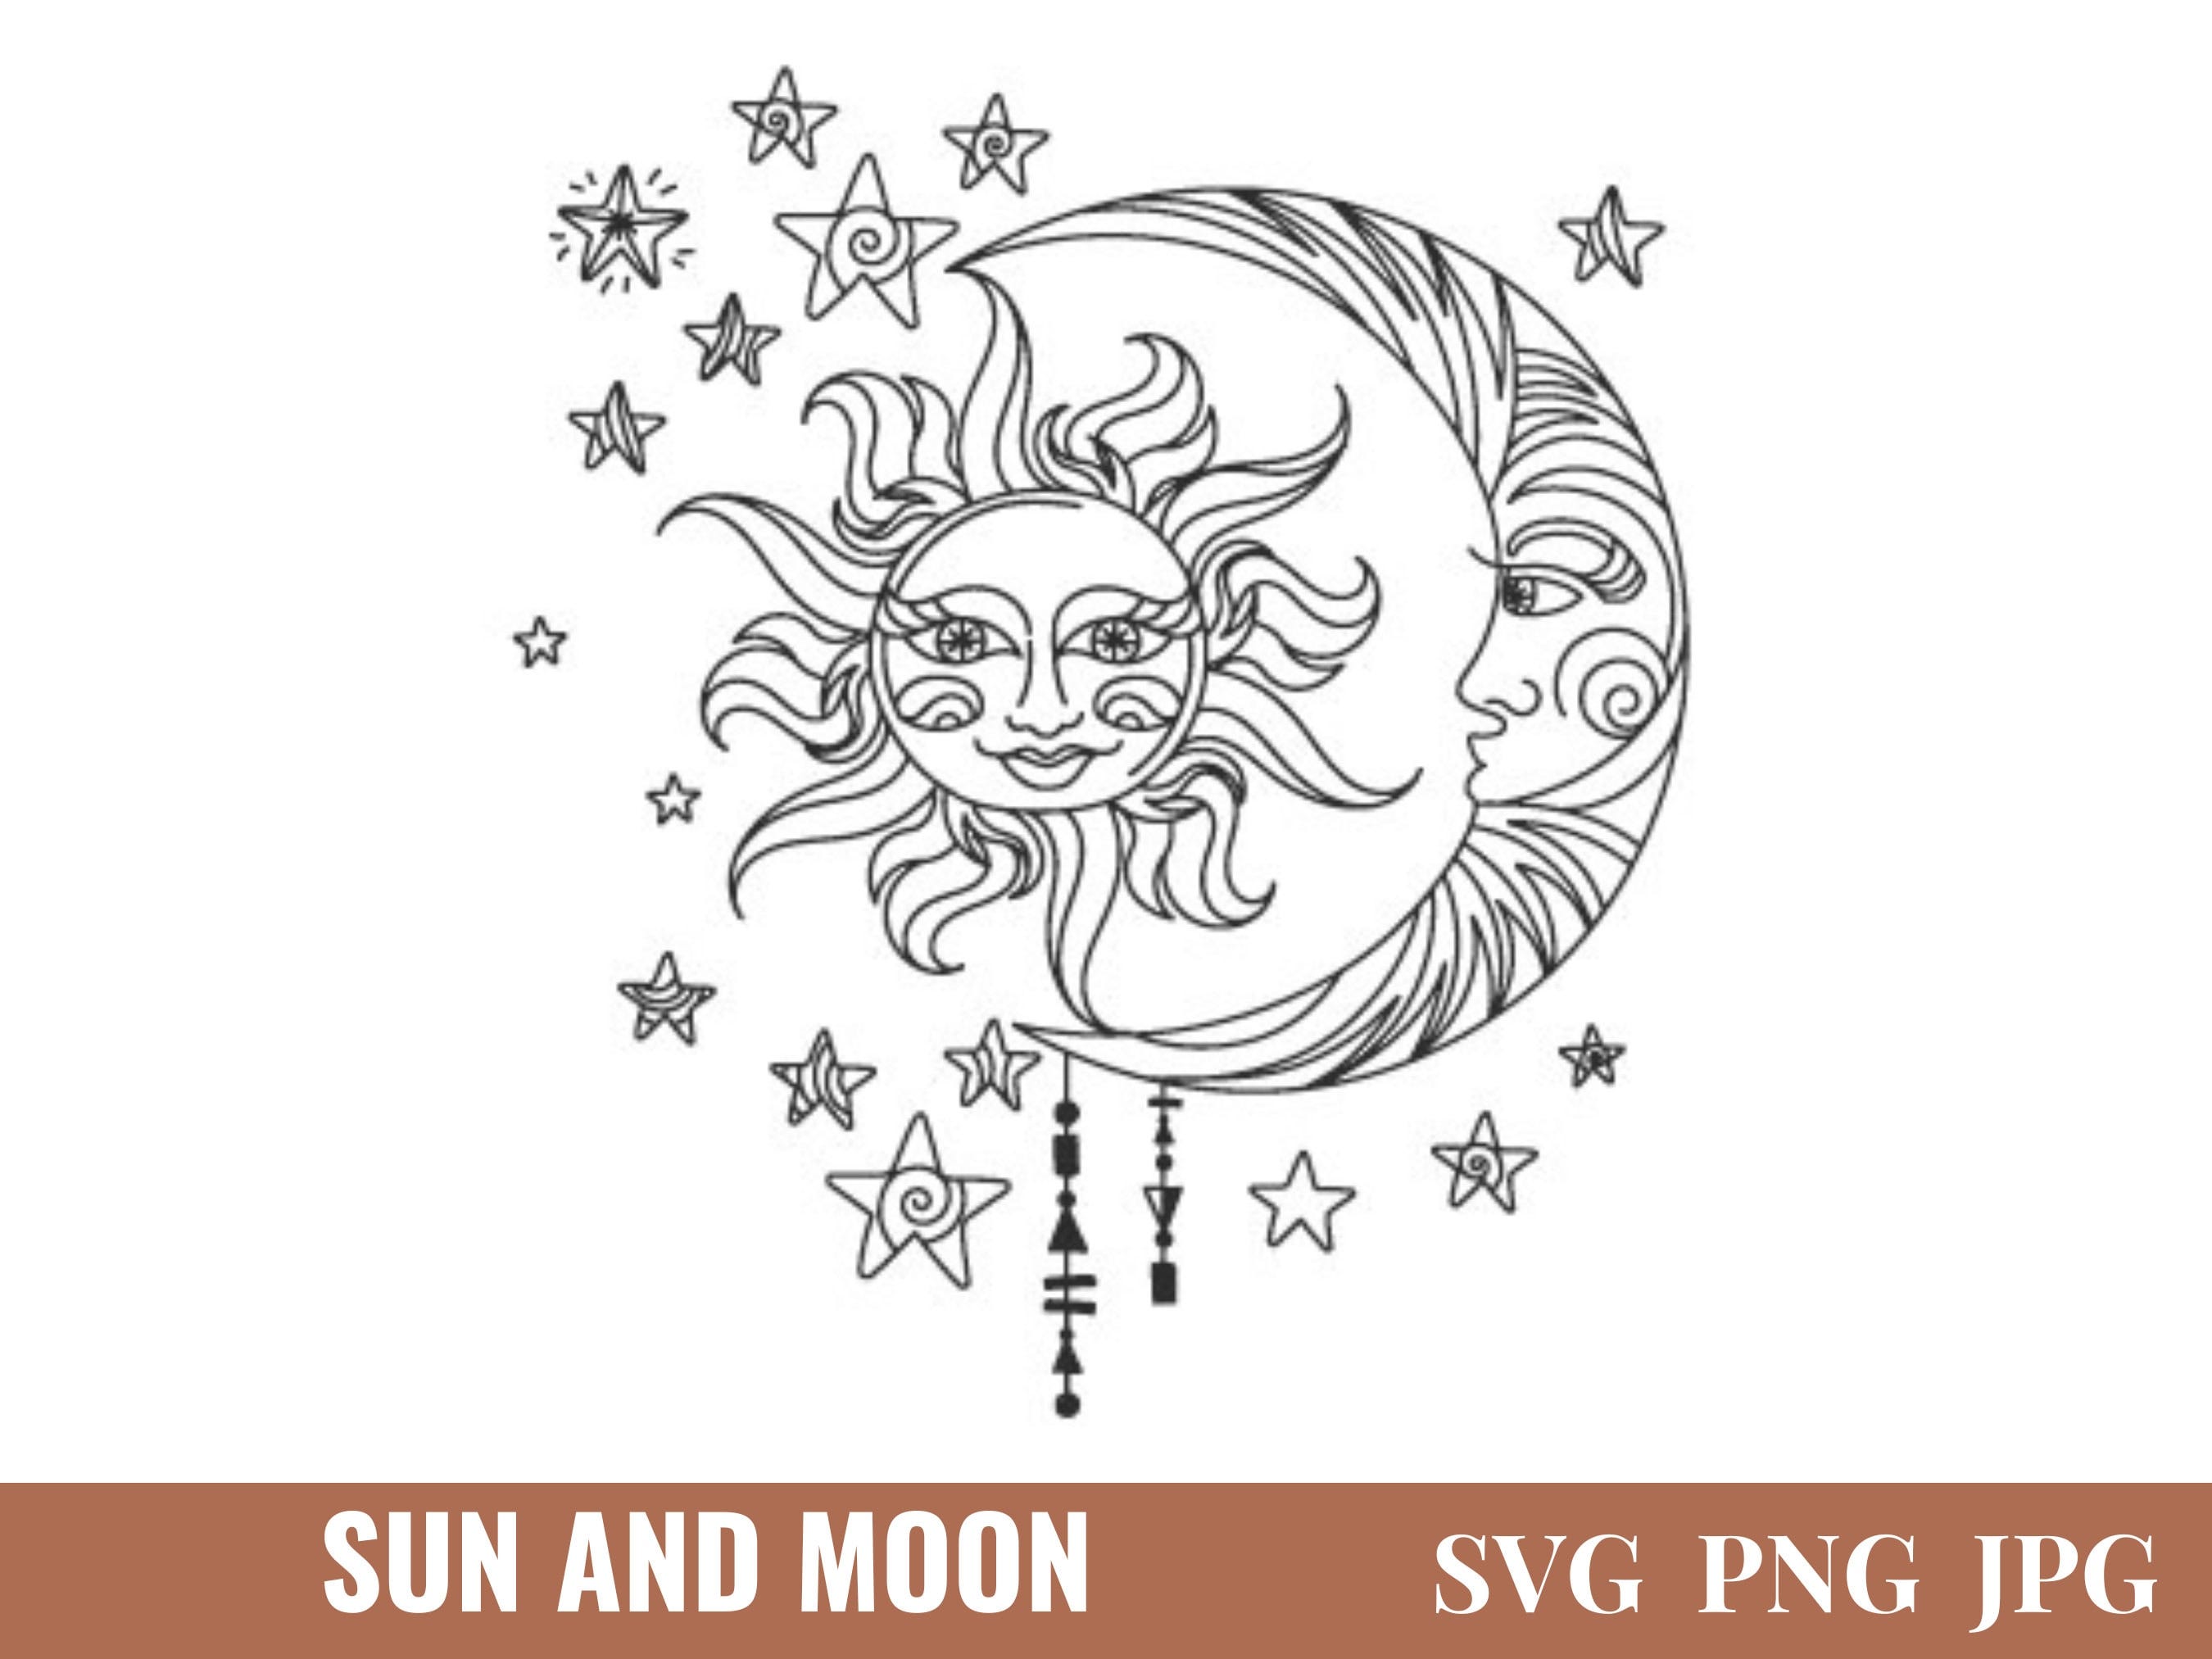 Sun and moon svg, celestial svg design with crescent moon, mystical print for shirt, magic moon silhouette png clipart, svg file for cricut